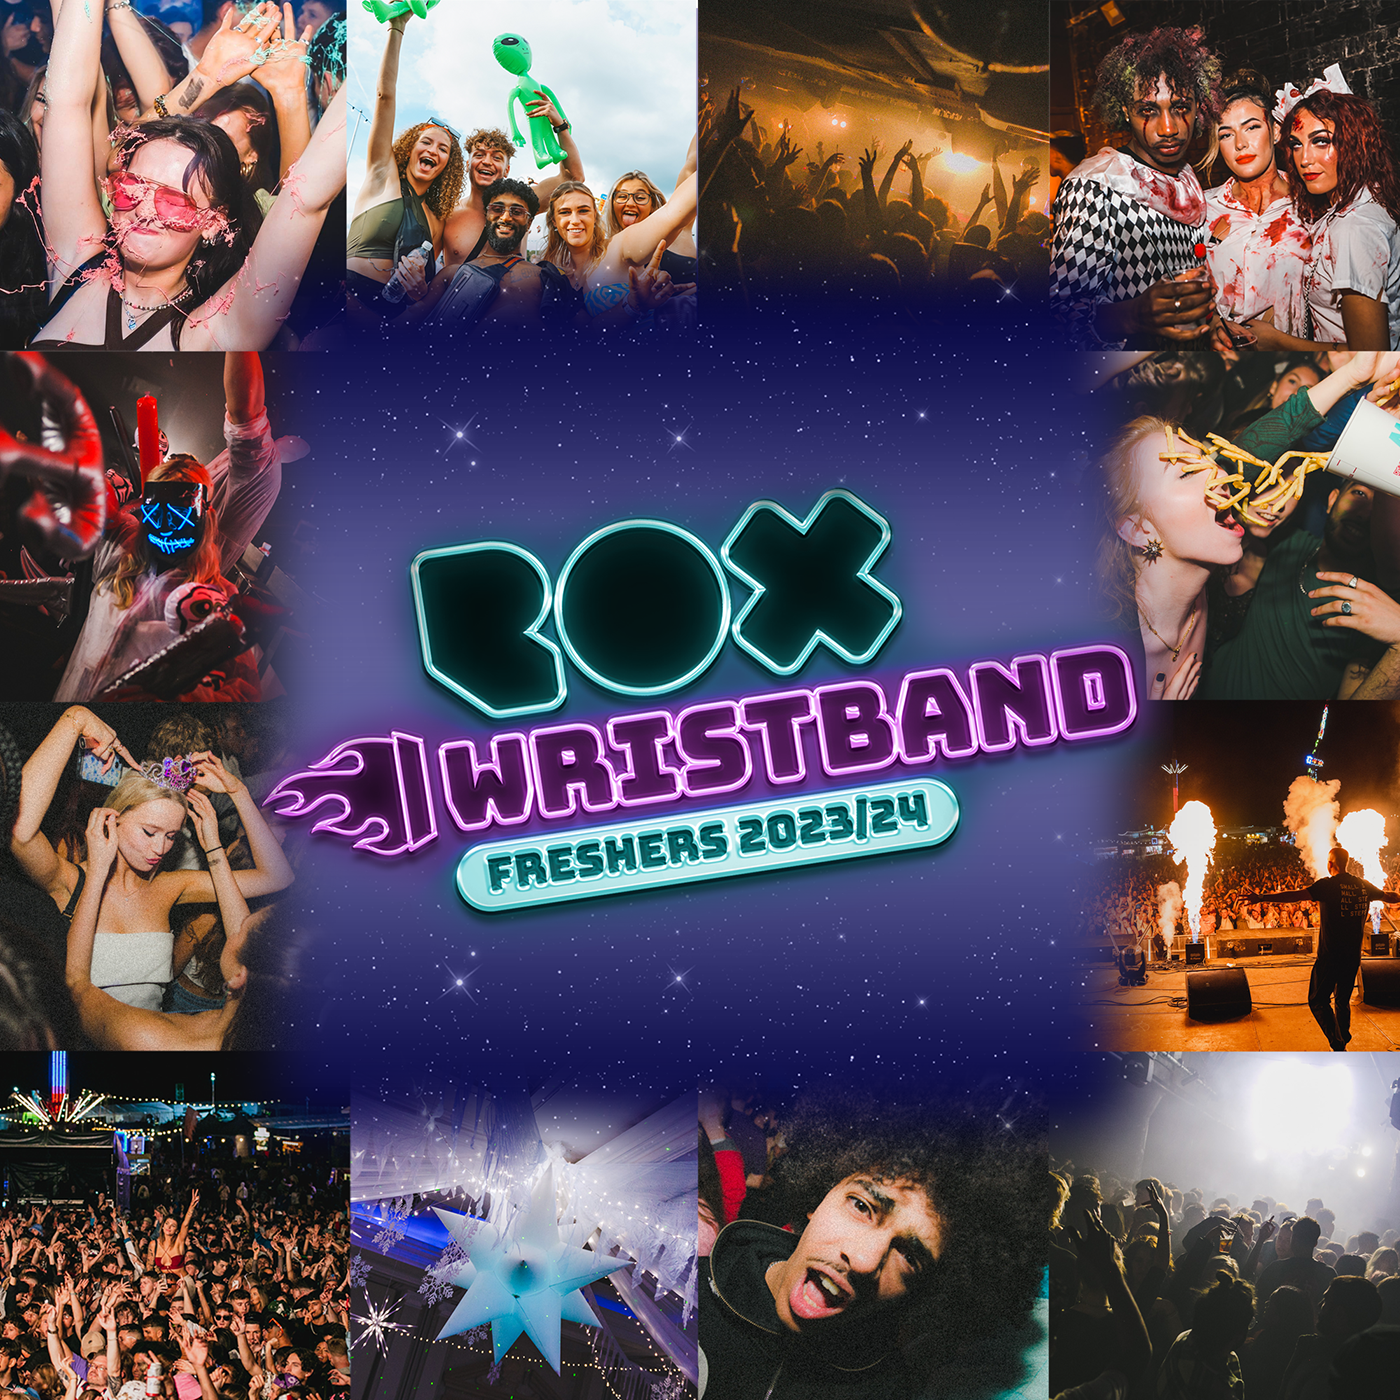 The Official 2023/24 Brighton and Sussex ROX Wristband 🚀